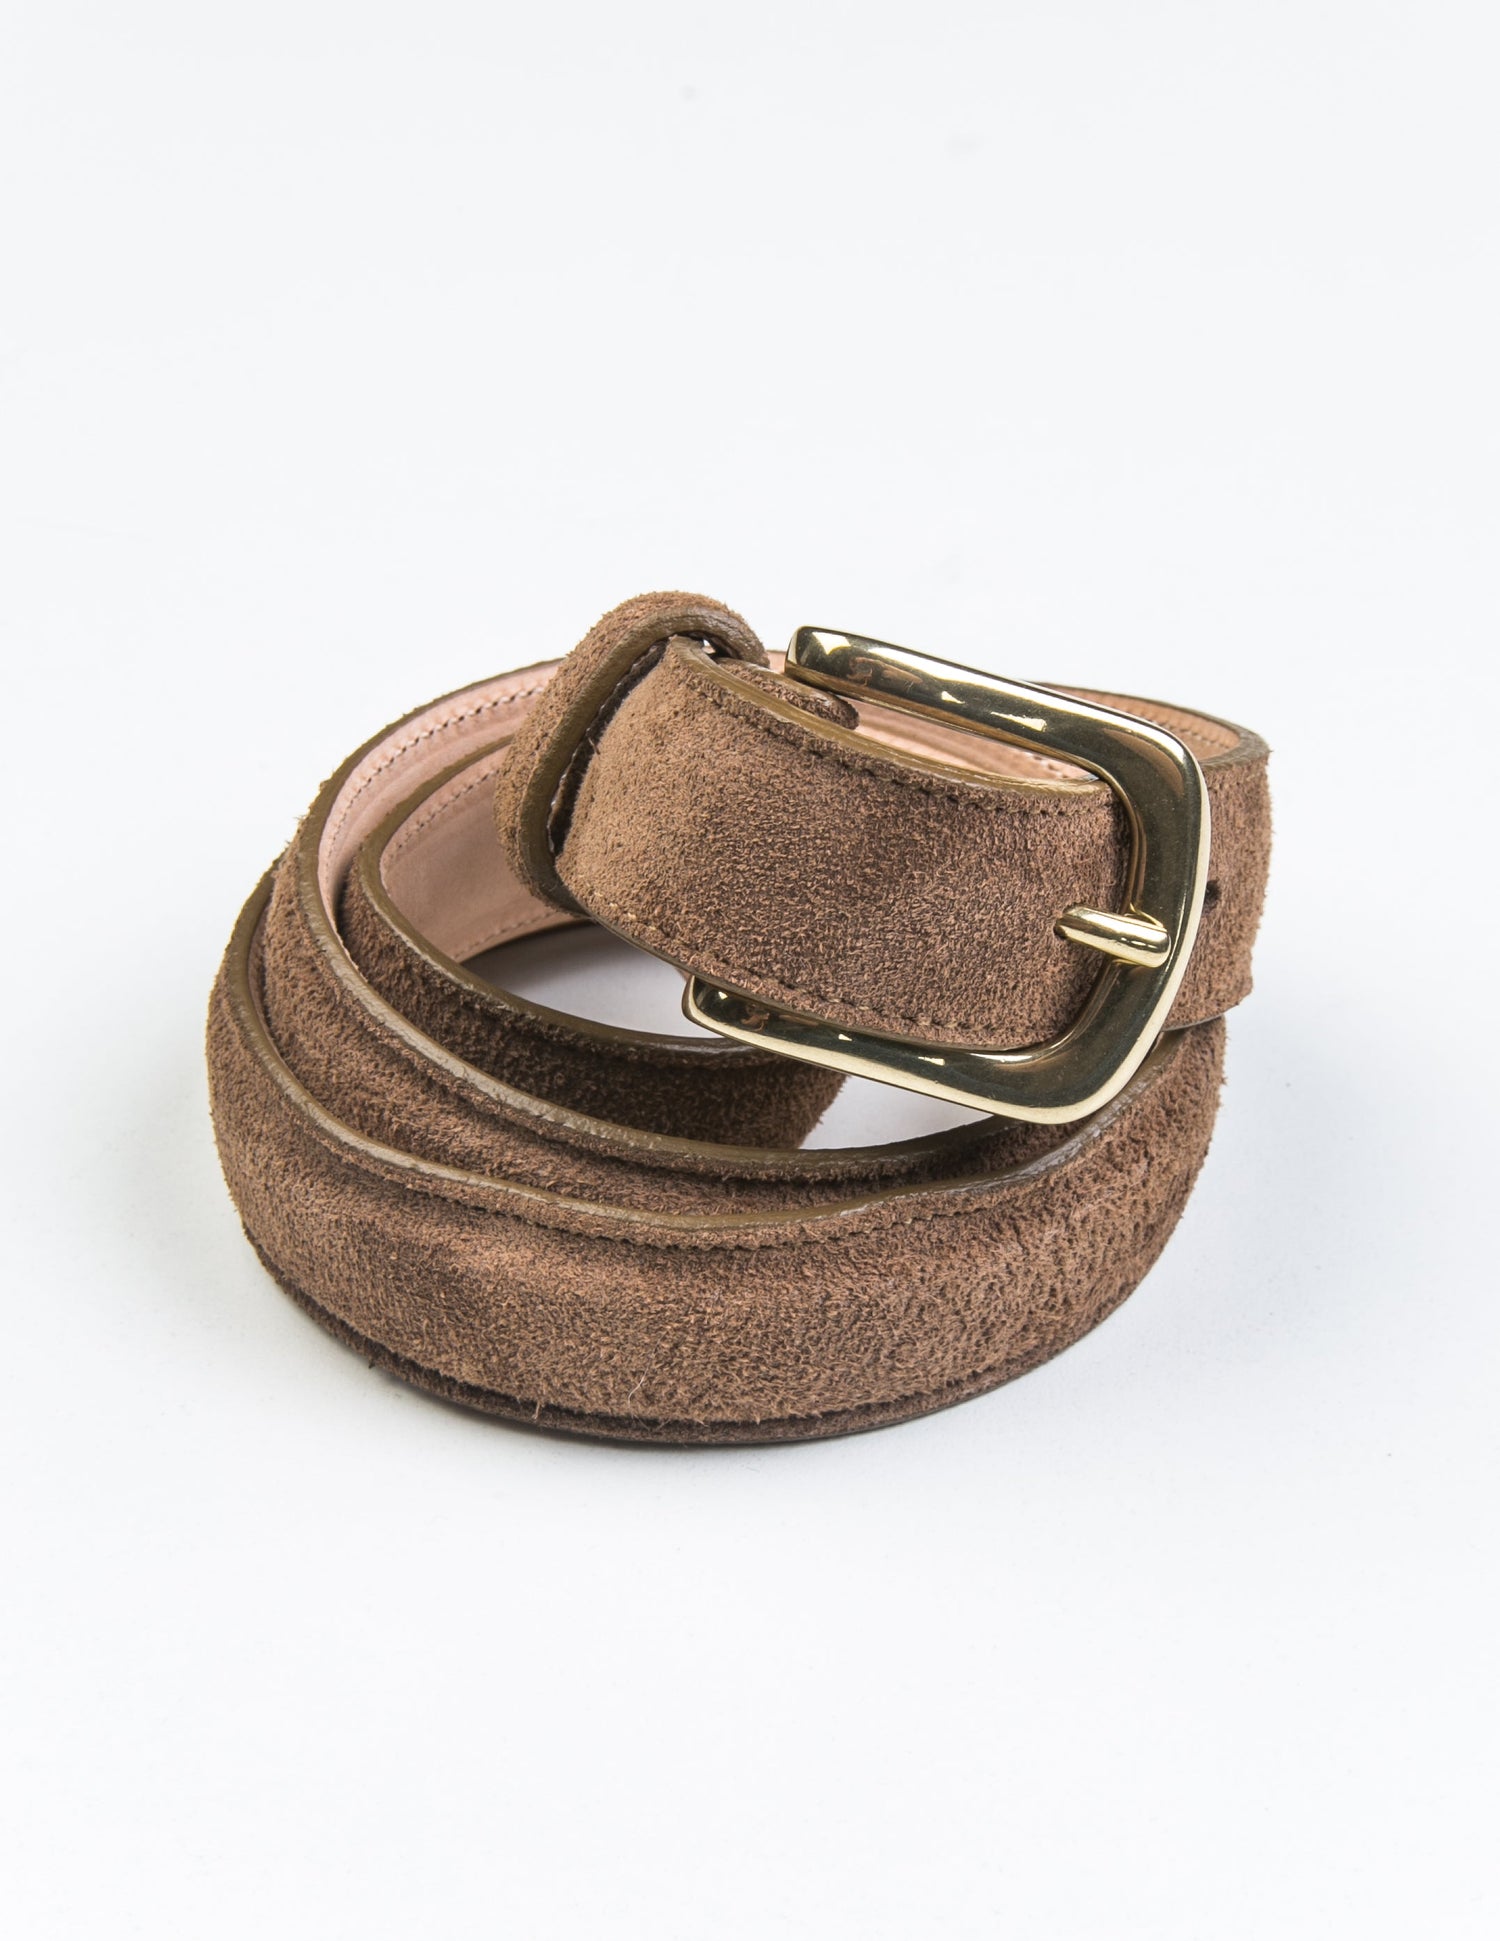 Photo of Brooklyn Tailors x Saddler's 25mm Belt in Suede Leather - Clay coiled up.